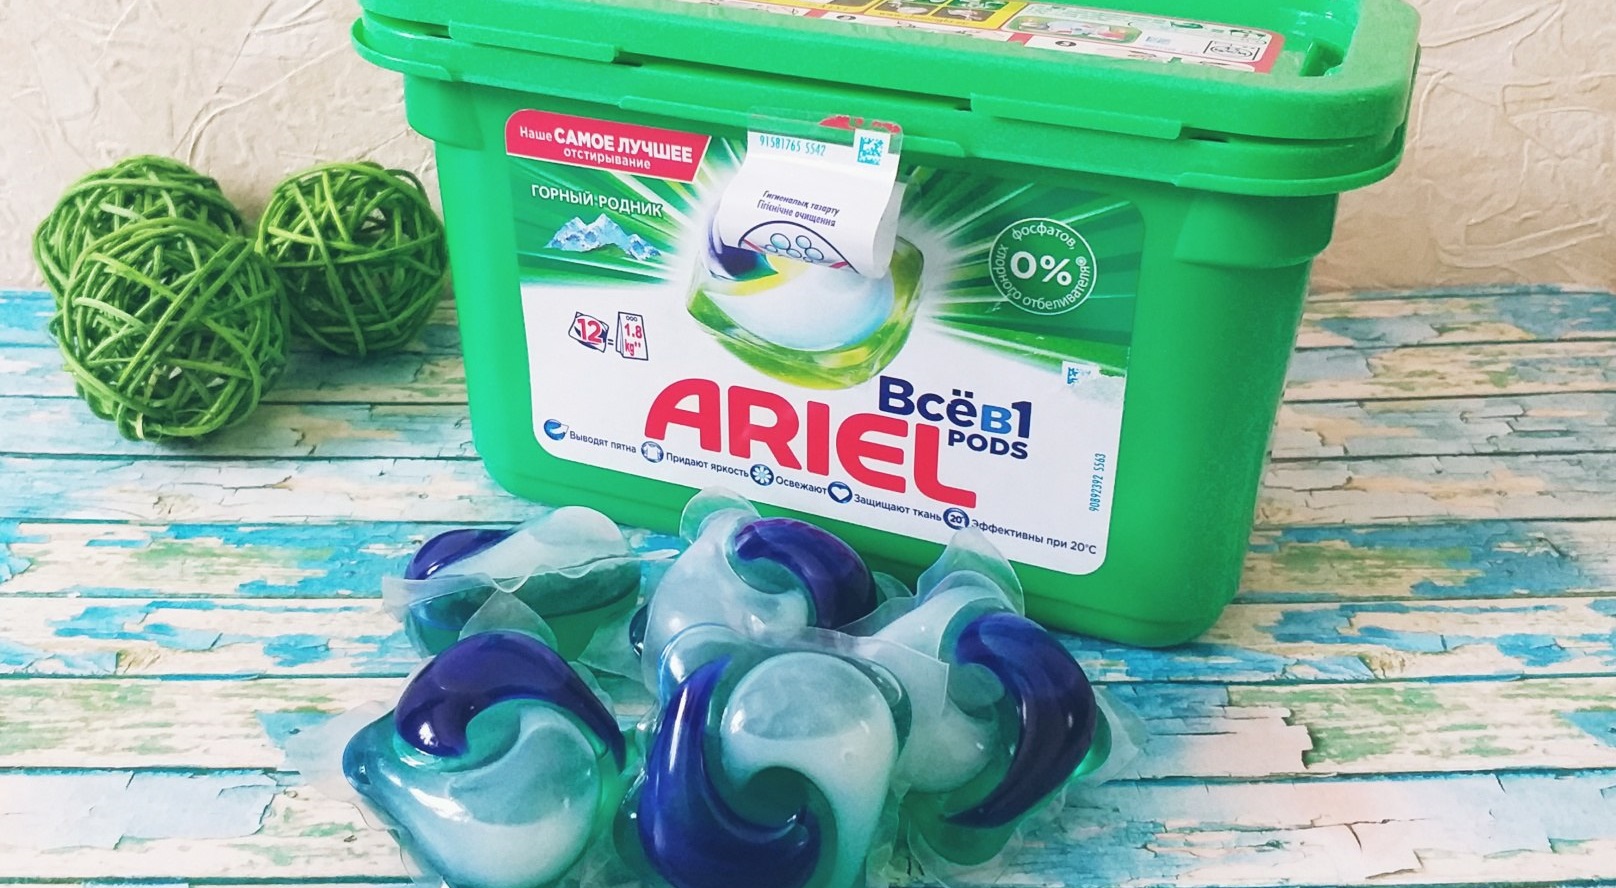 Ariel capsules Pods All-in-1 Mountain spring